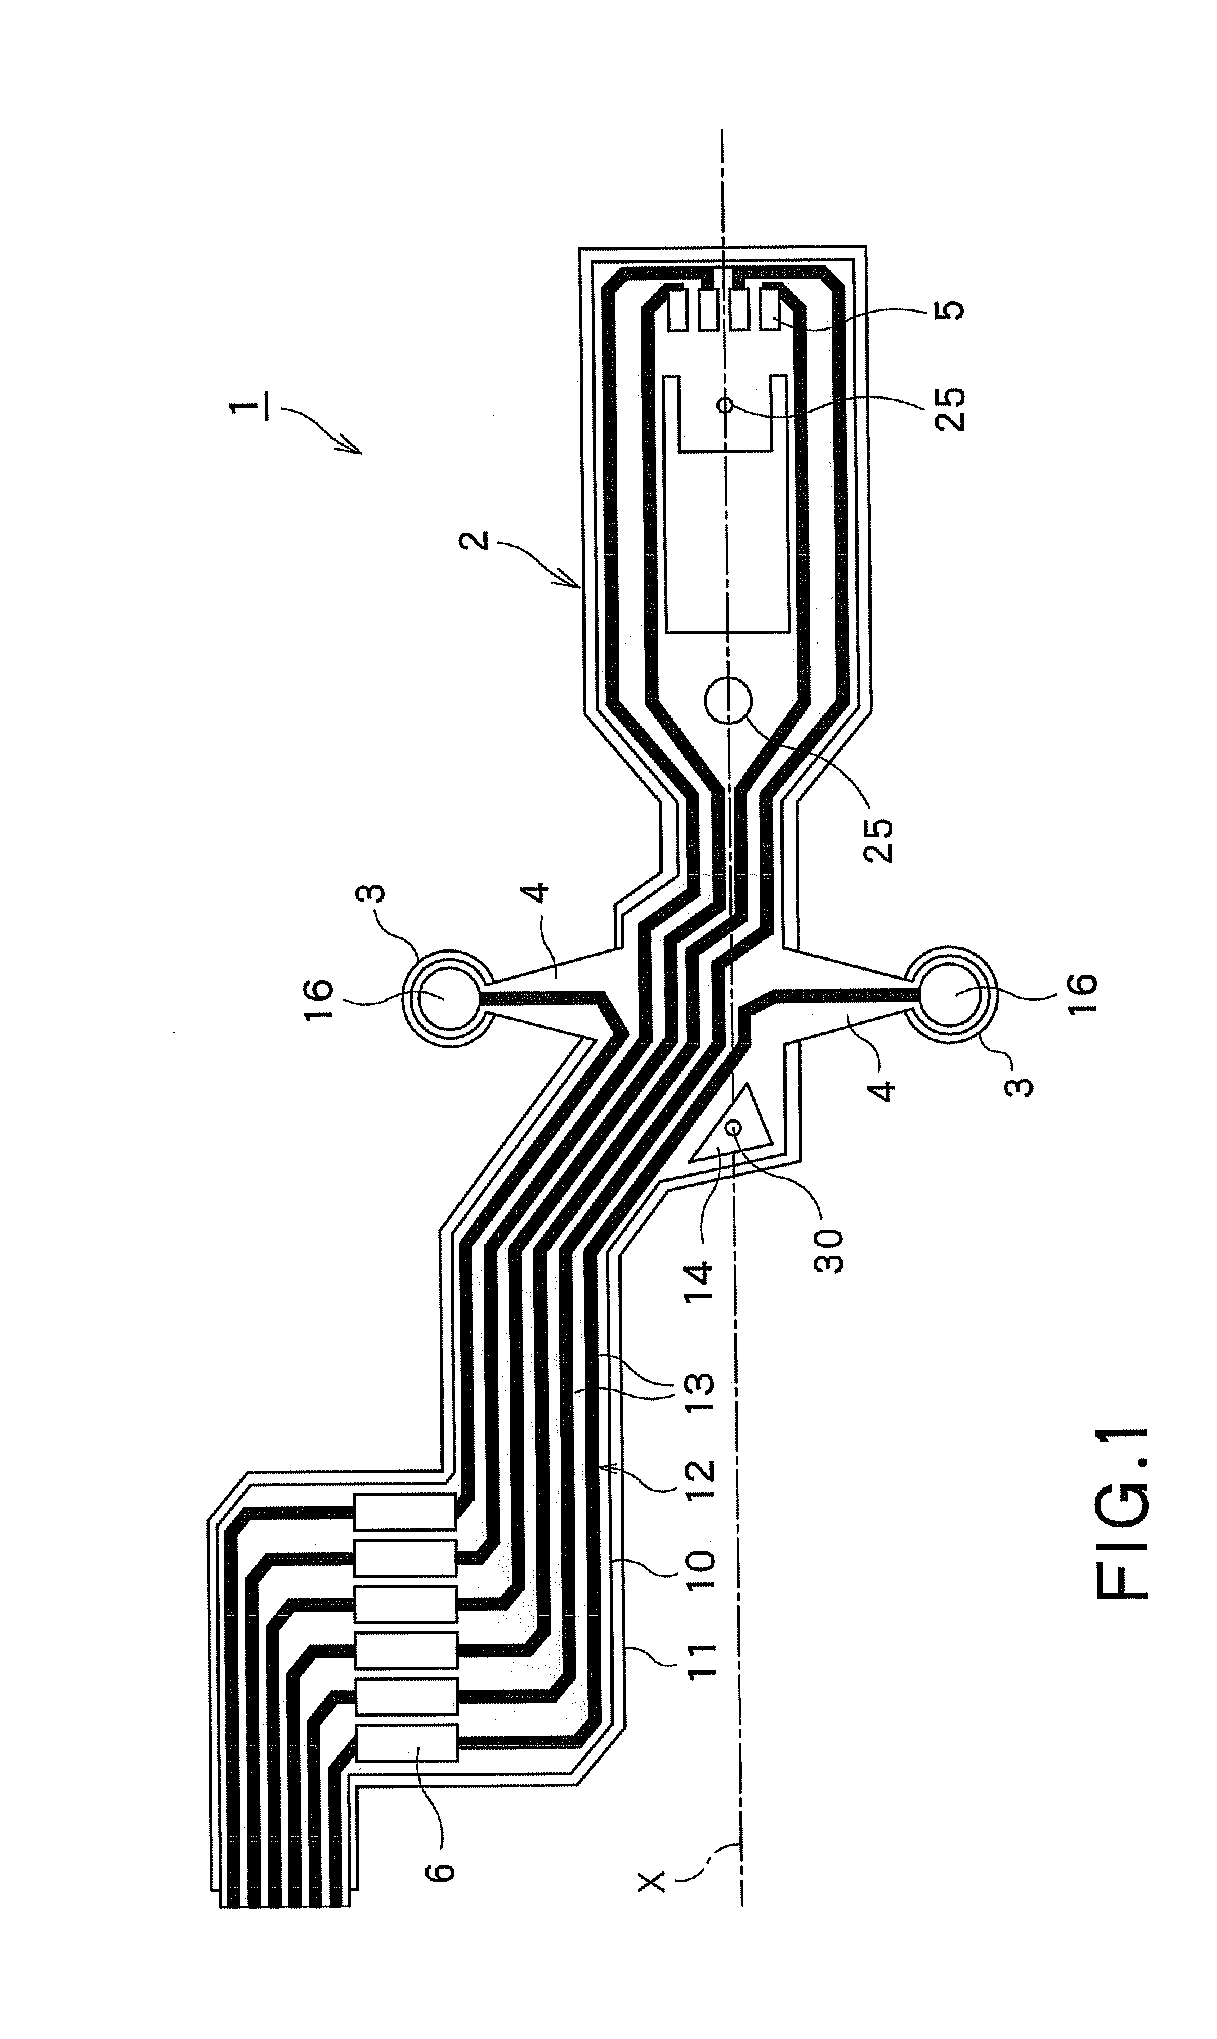 Suspension substrate, suspension, head suspension, and hard disk drive